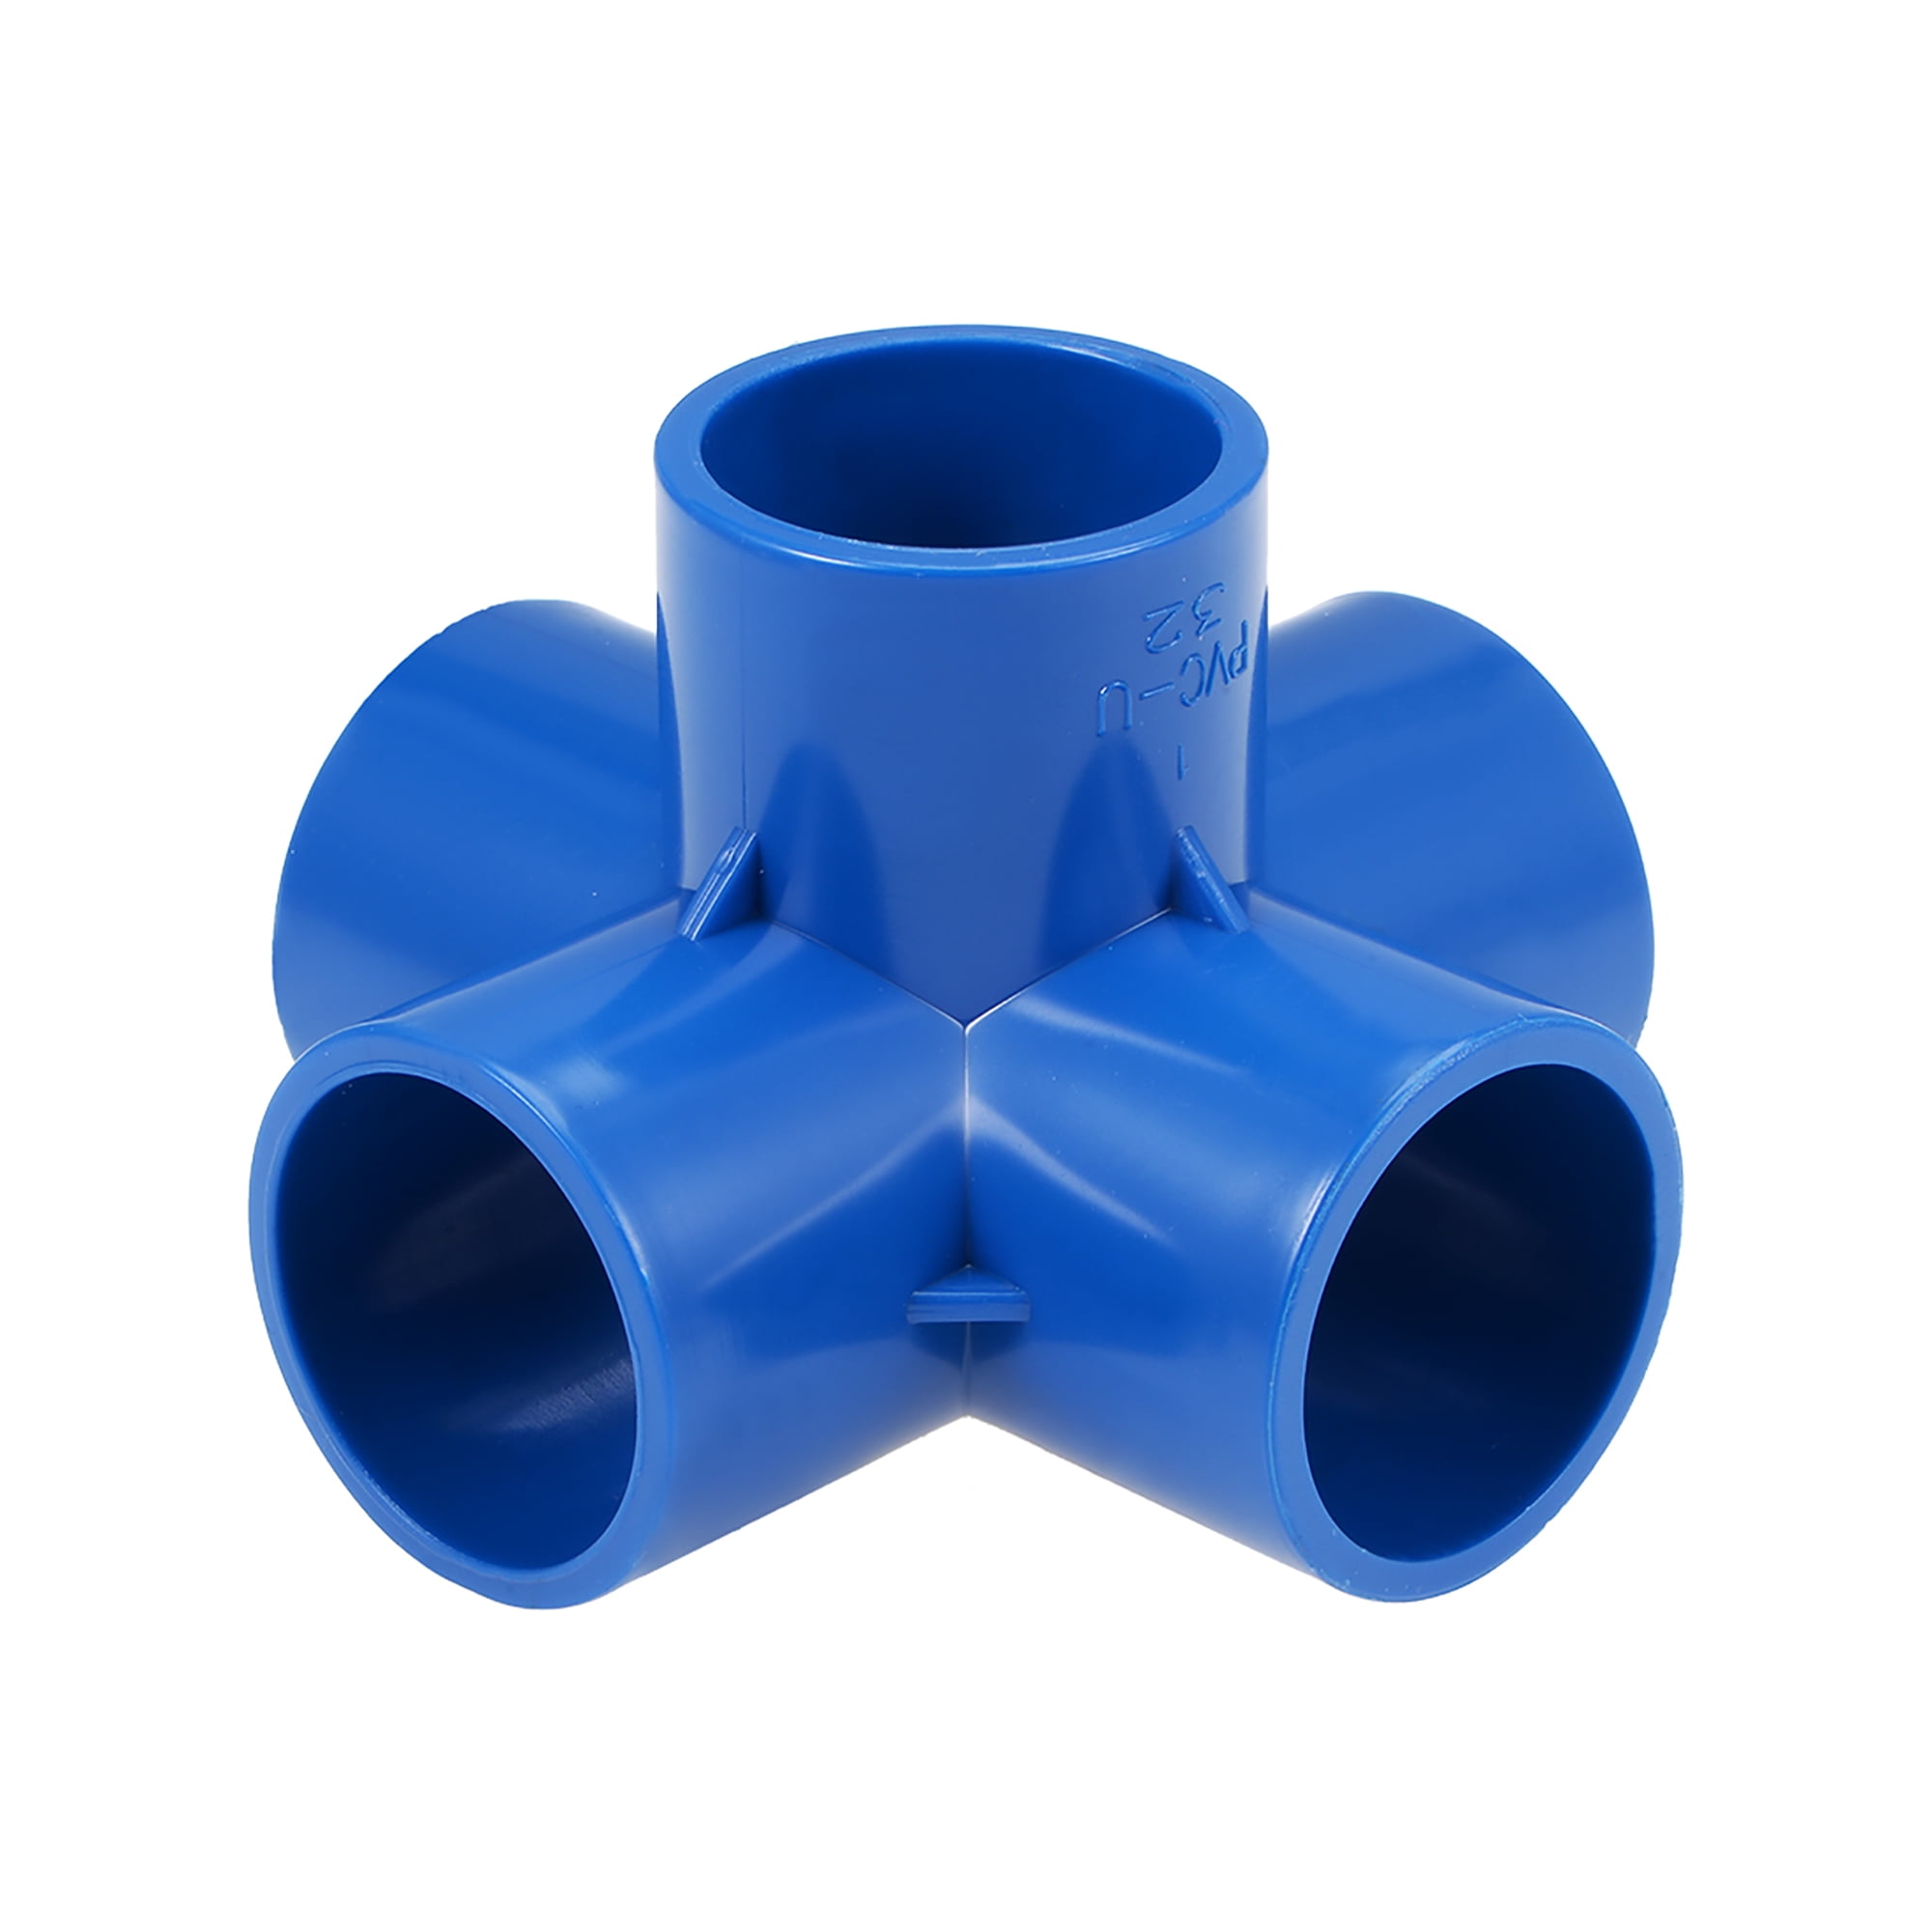 5-Way Elbow PVC Pipe Fitting,Furniture Grade,1-inch Size Tee Corner